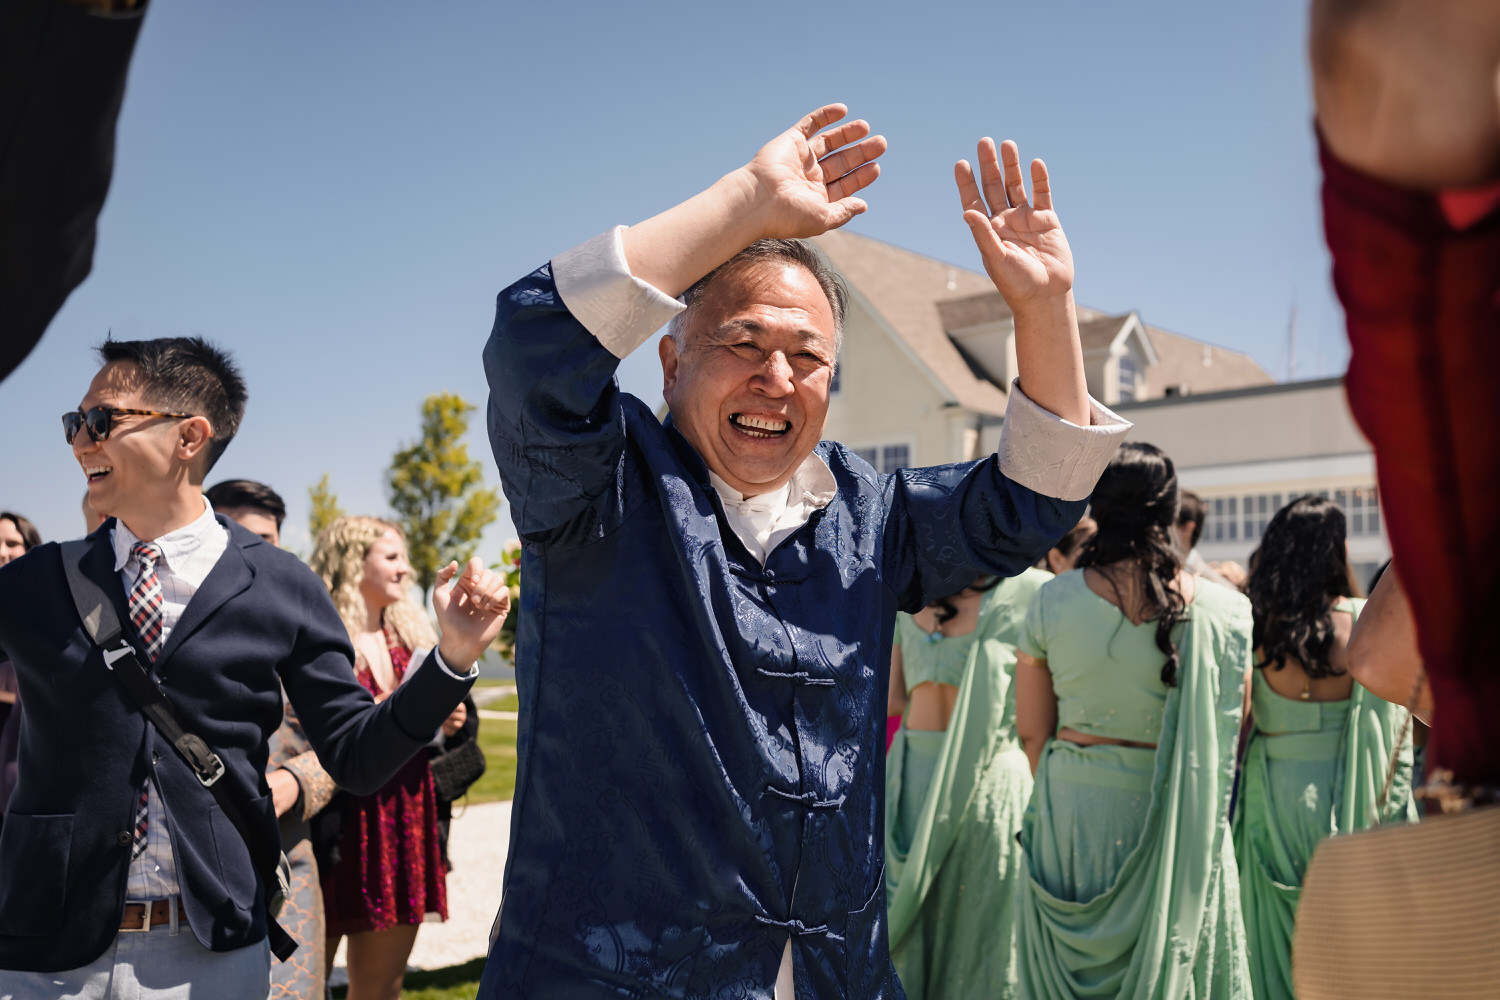 Chinese and Indian wedding at Belle Mer in Newport, Rhode Island by Nicole Chan Photography